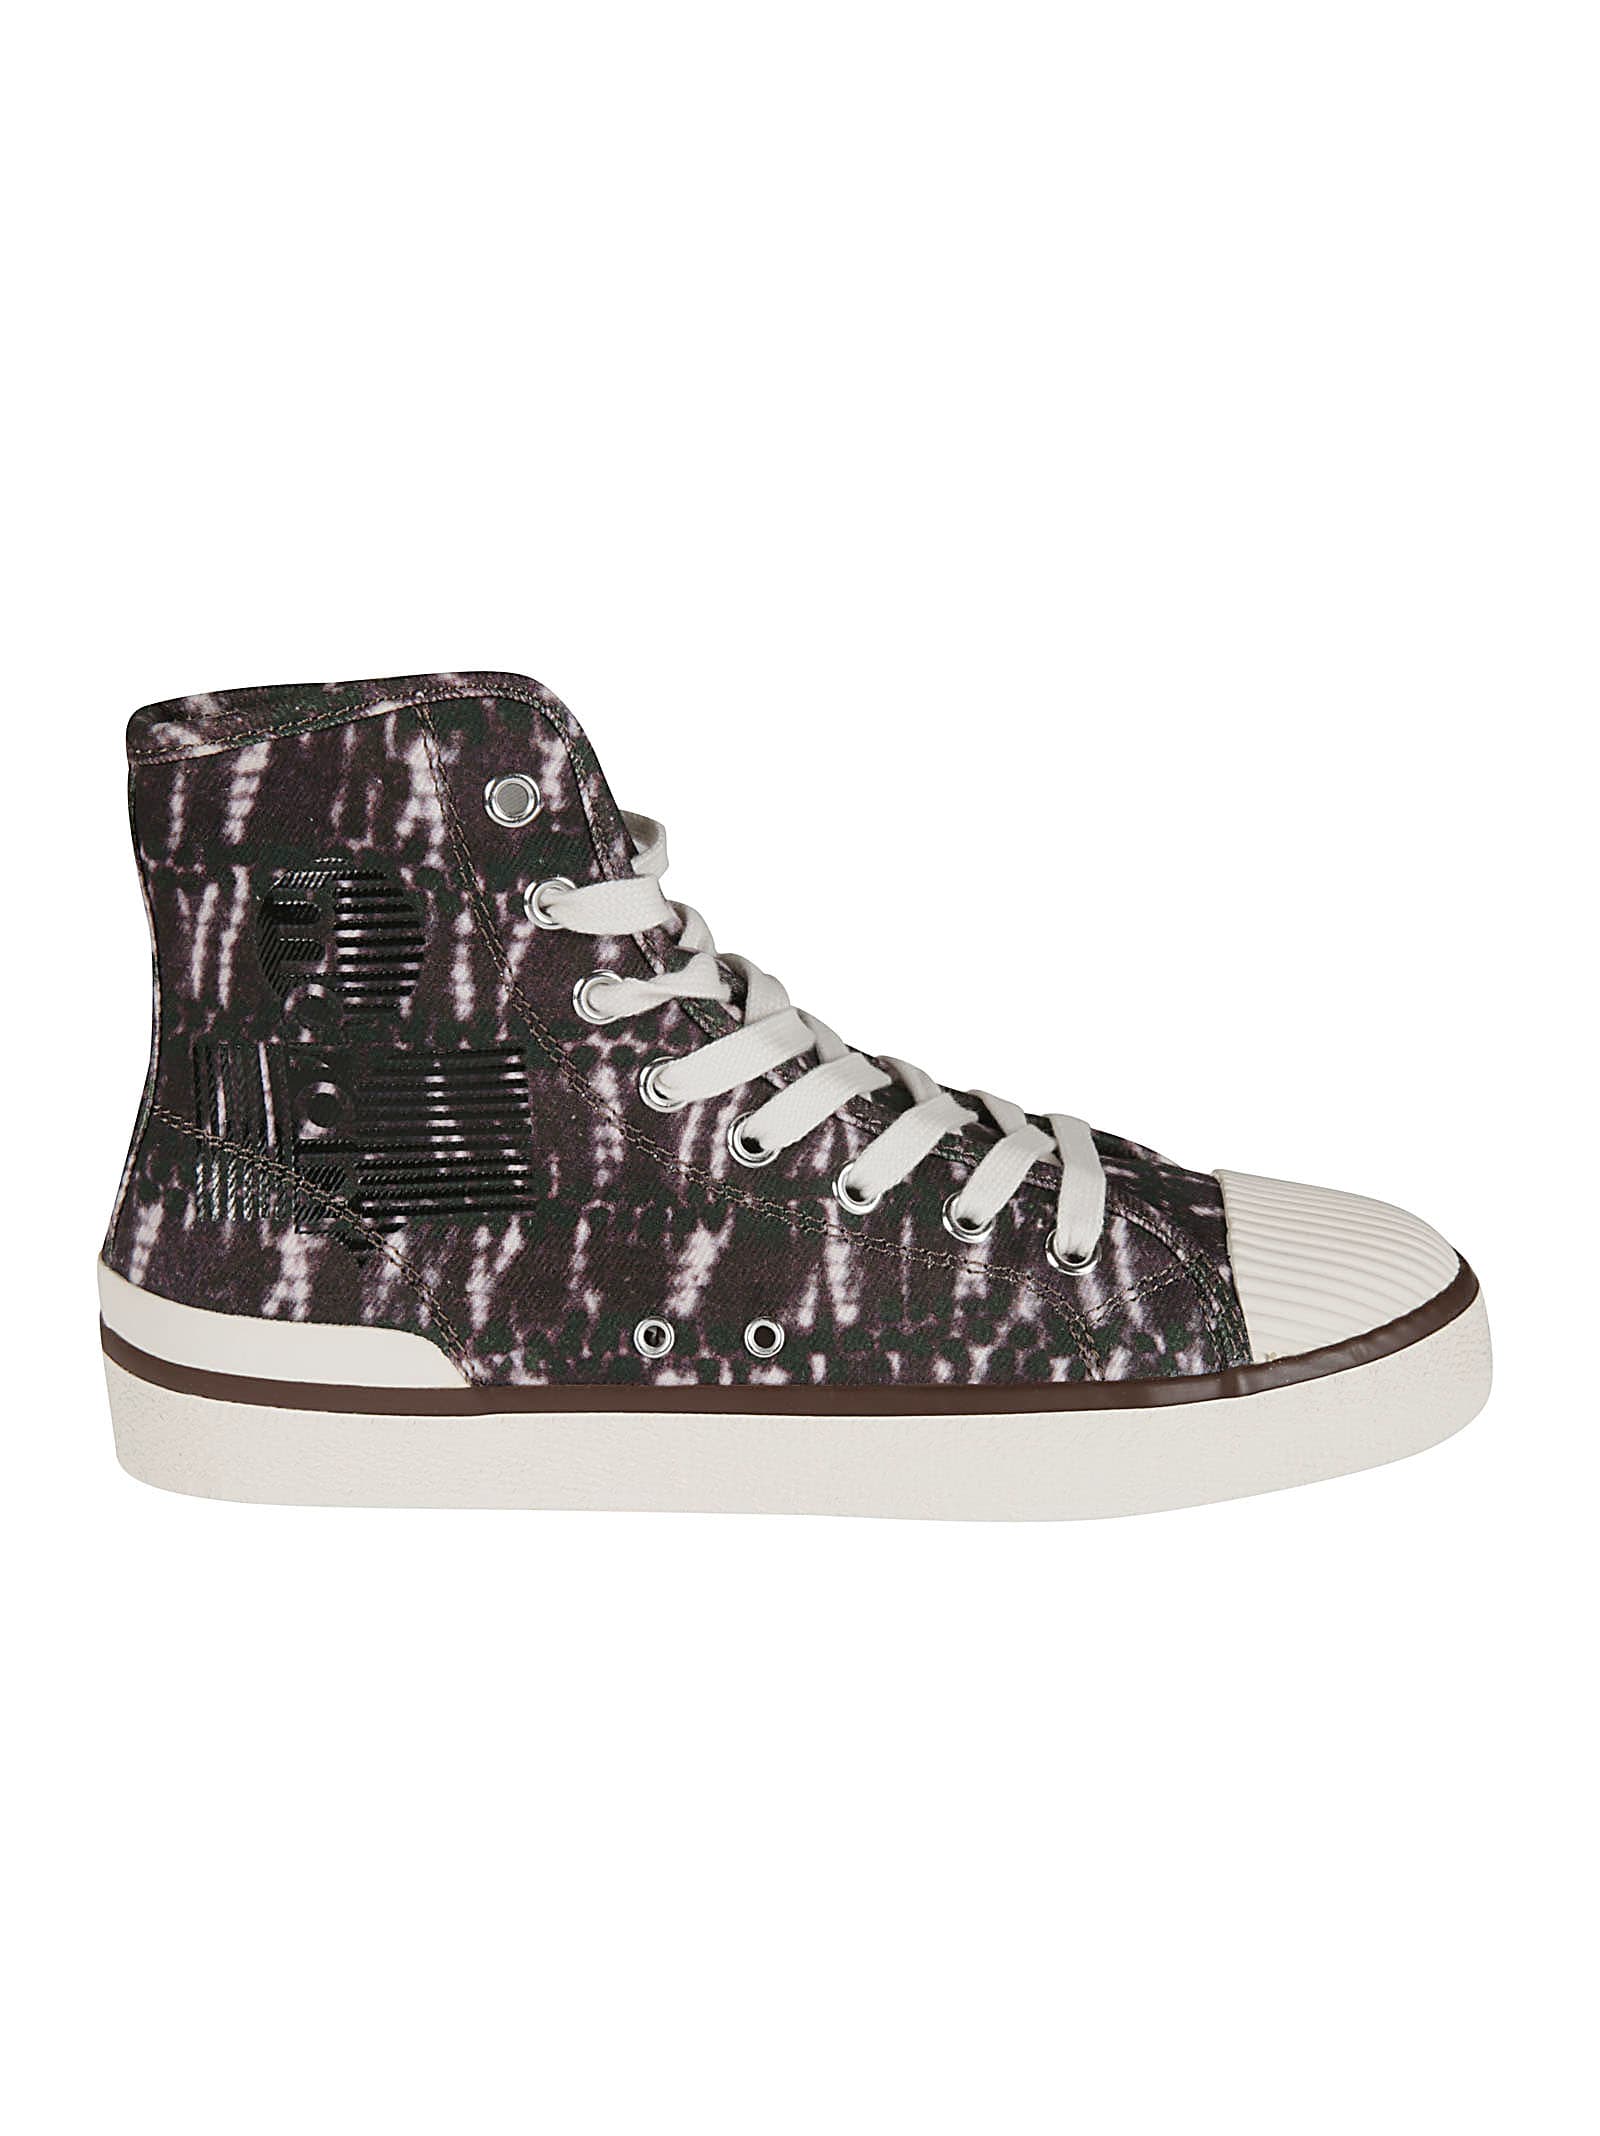 Buy Isabel Marant Benkeen Sneakers online, shop Isabel Marant shoes with free shipping